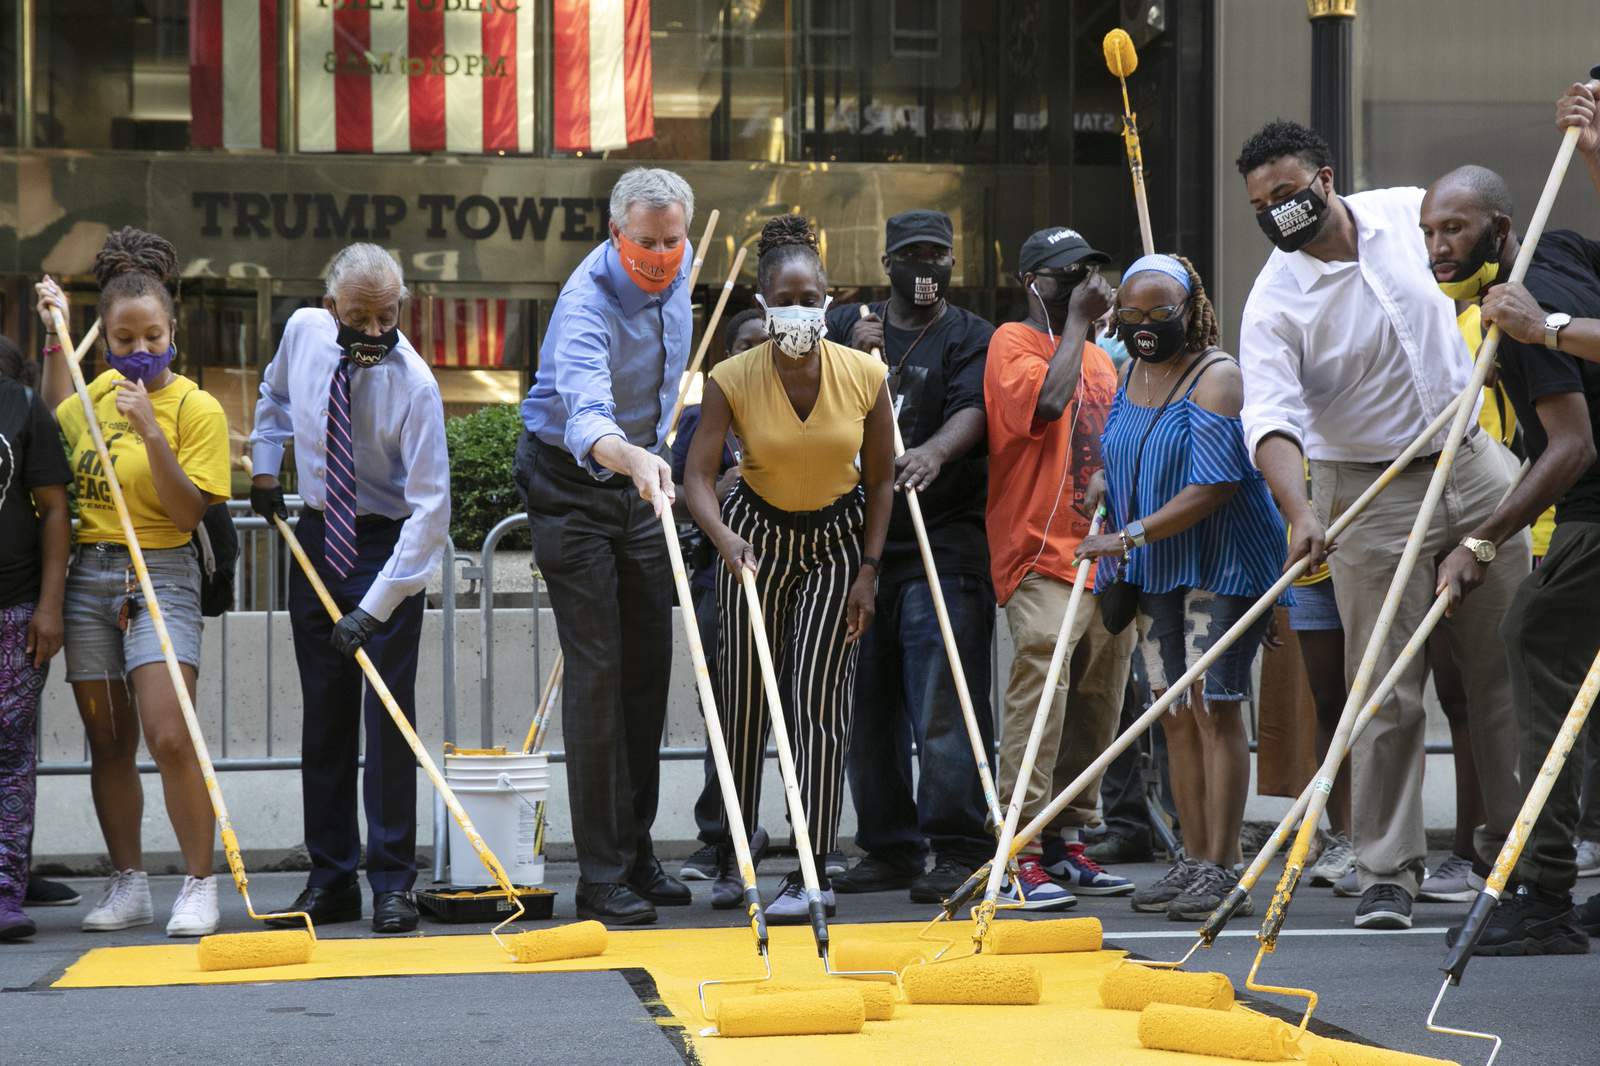 Mayor helps paint 'Black Lives Matter' outside Trump Tower